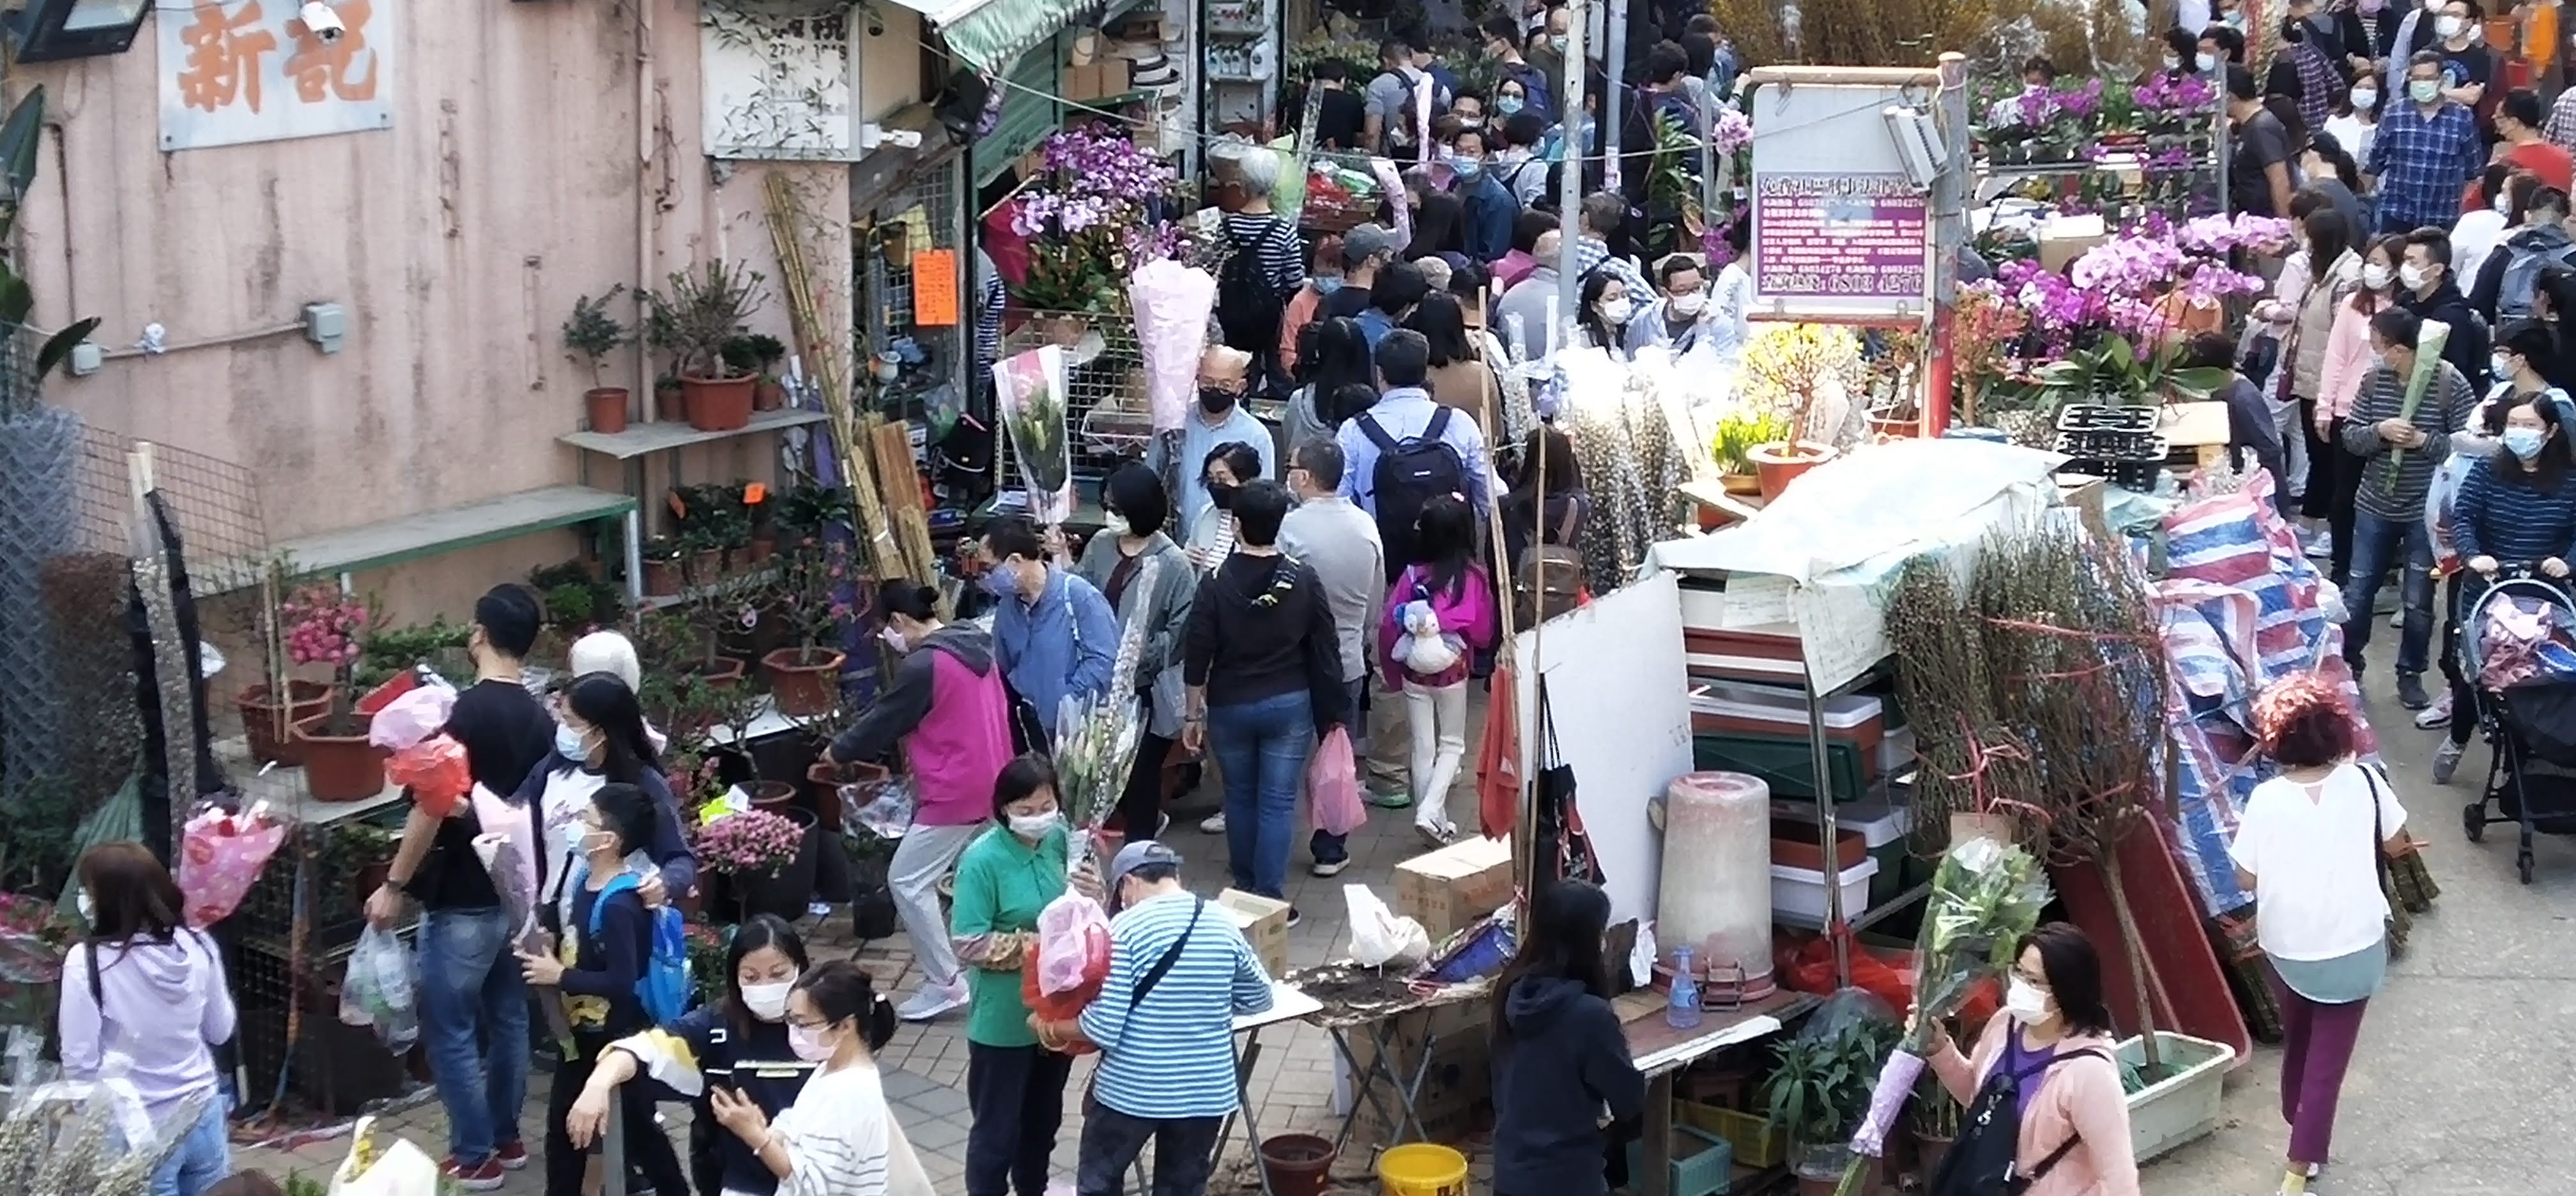 It is not easy to choose and buy flowers at the over-crowded Mong Kok's Flower Market before Chinese New Year.